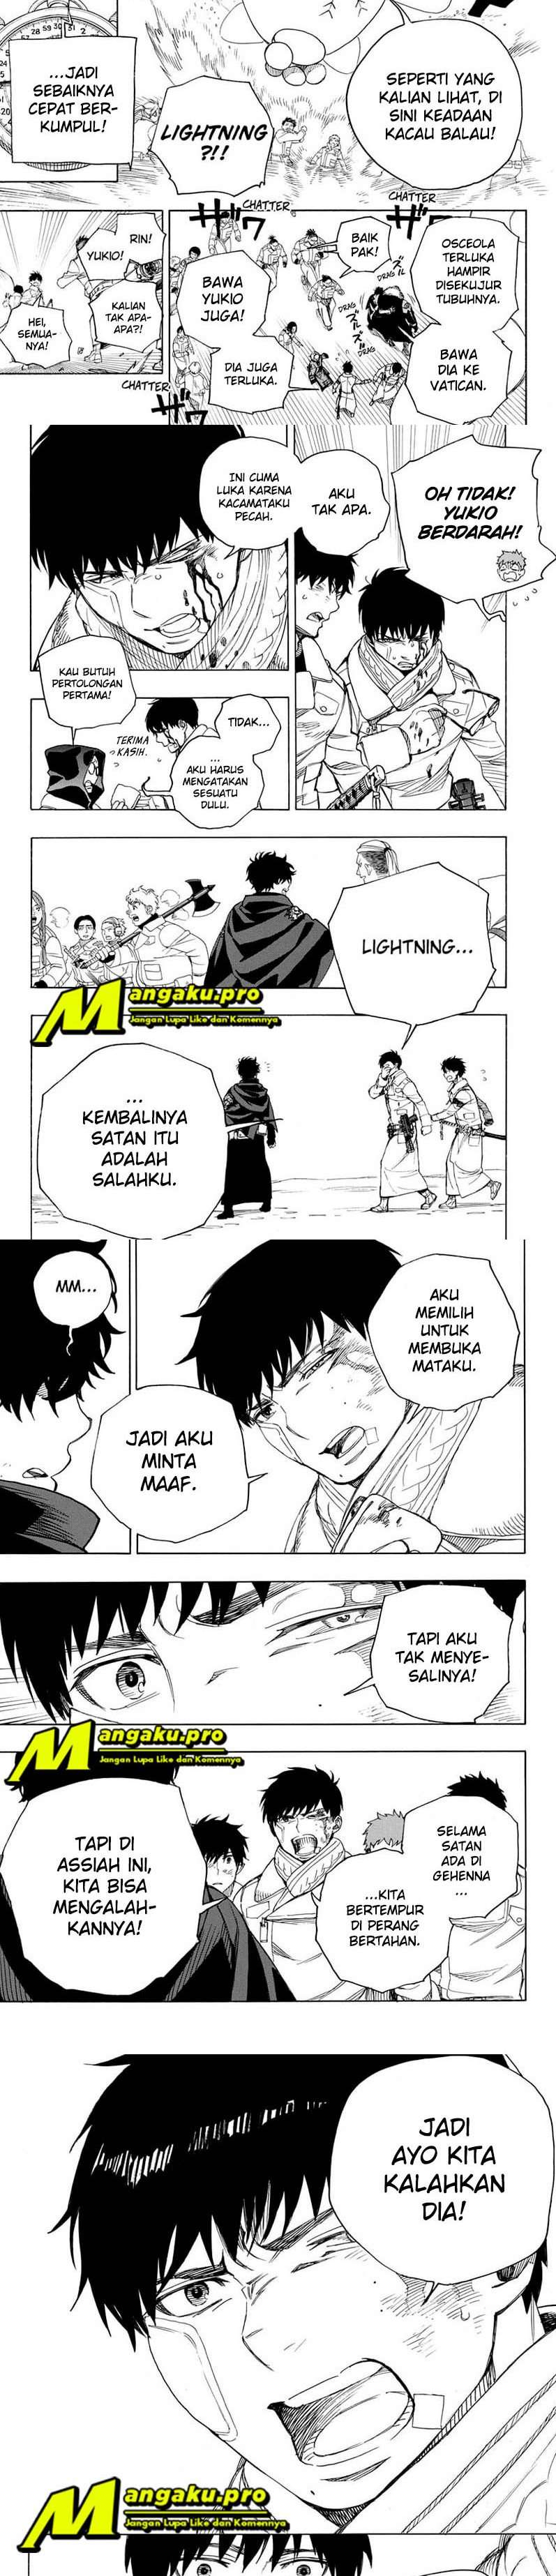 Ao no Exorcist Chapter 130.2 2